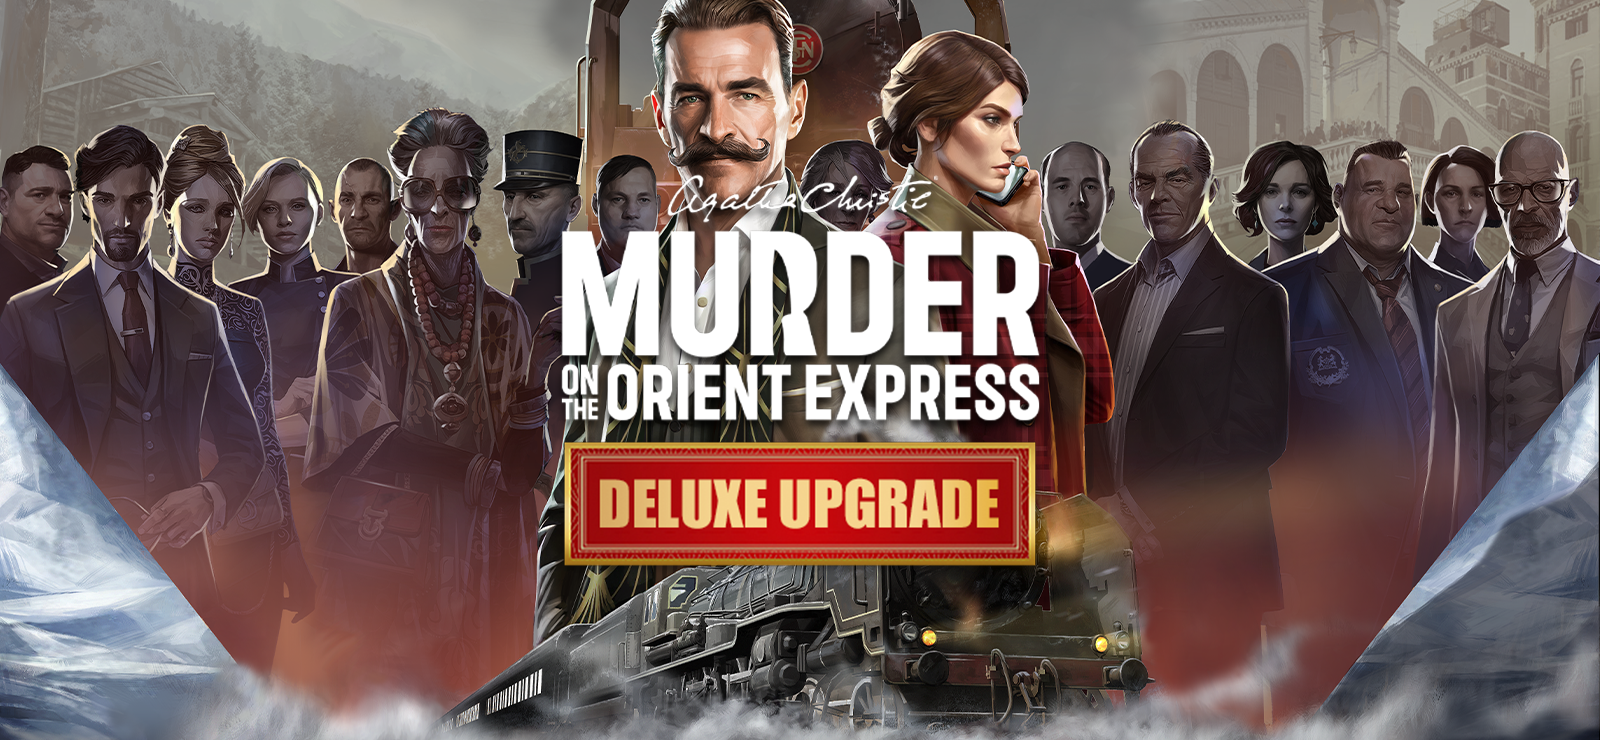 Agatha Christie - Murder On The Orient Express - Deluxe Upgrade